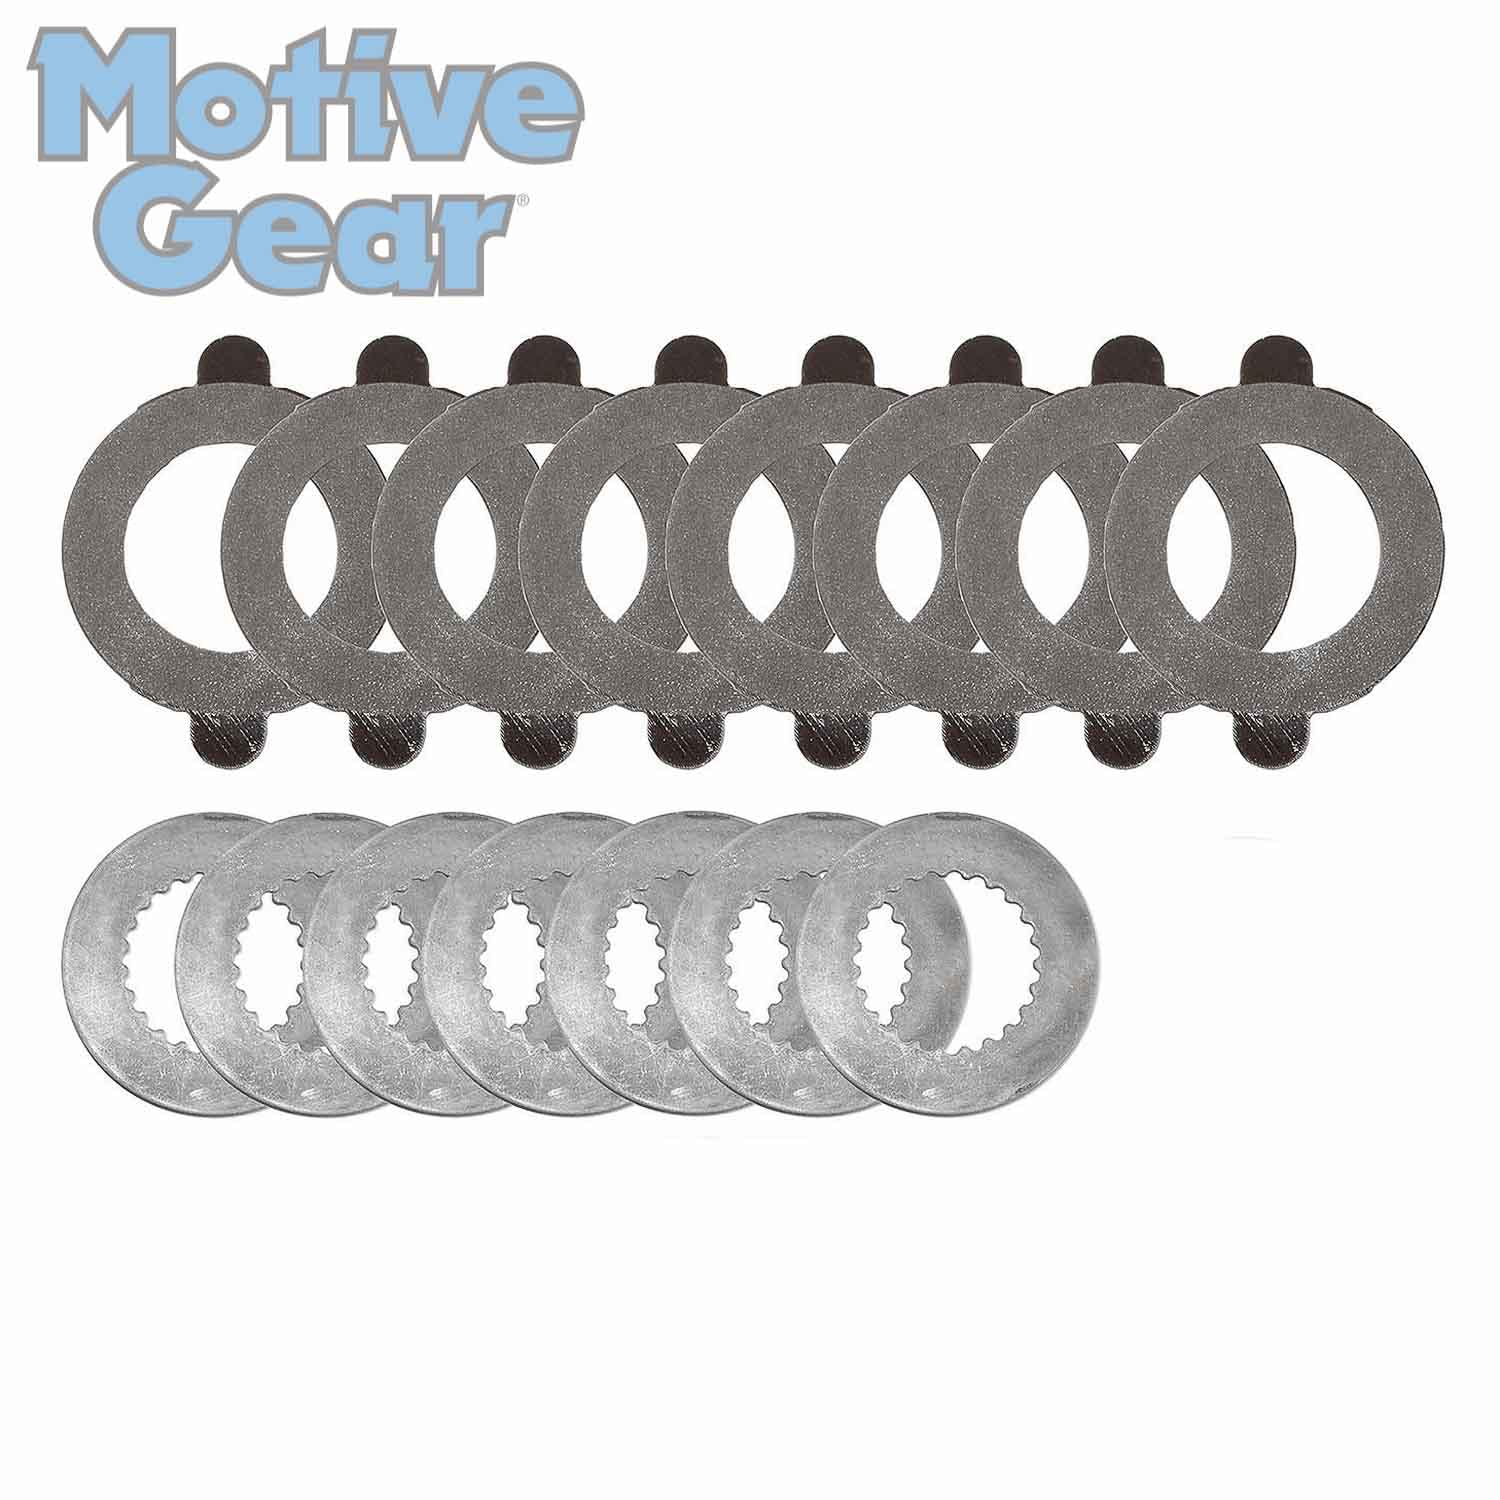 Motive Gear F8.8CPK Differential Clutch Pack